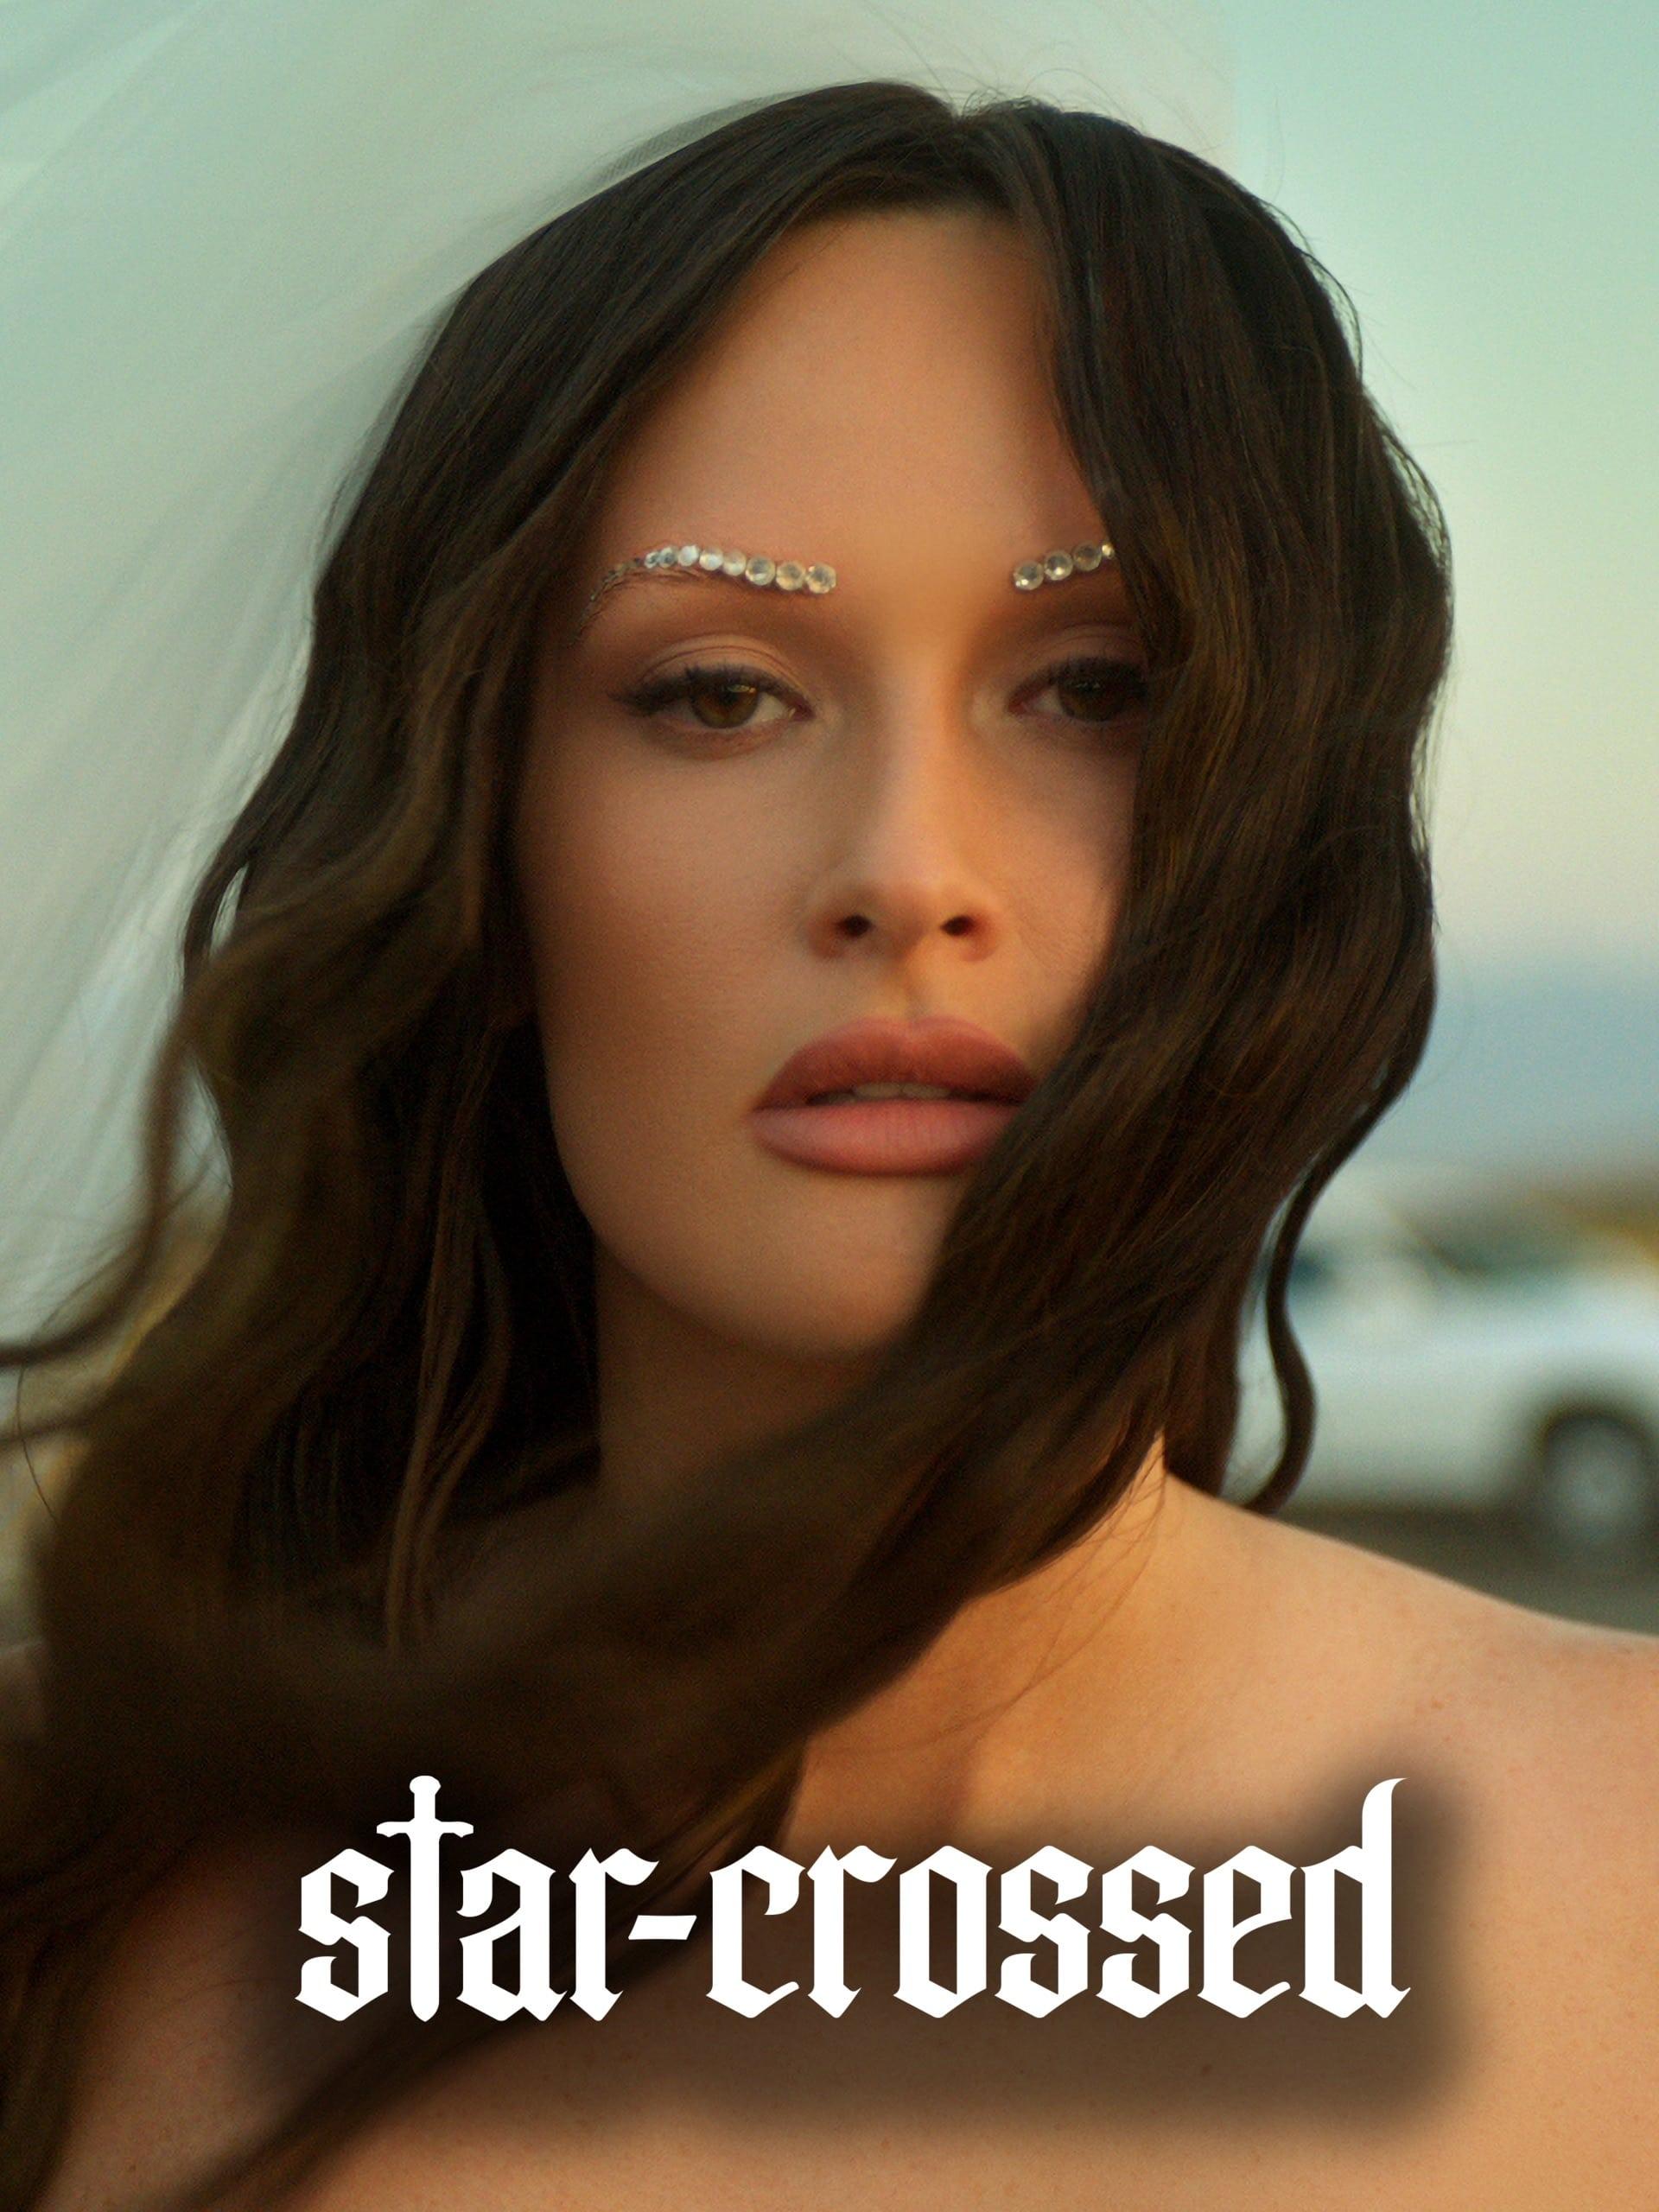 star-crossed: the film poster